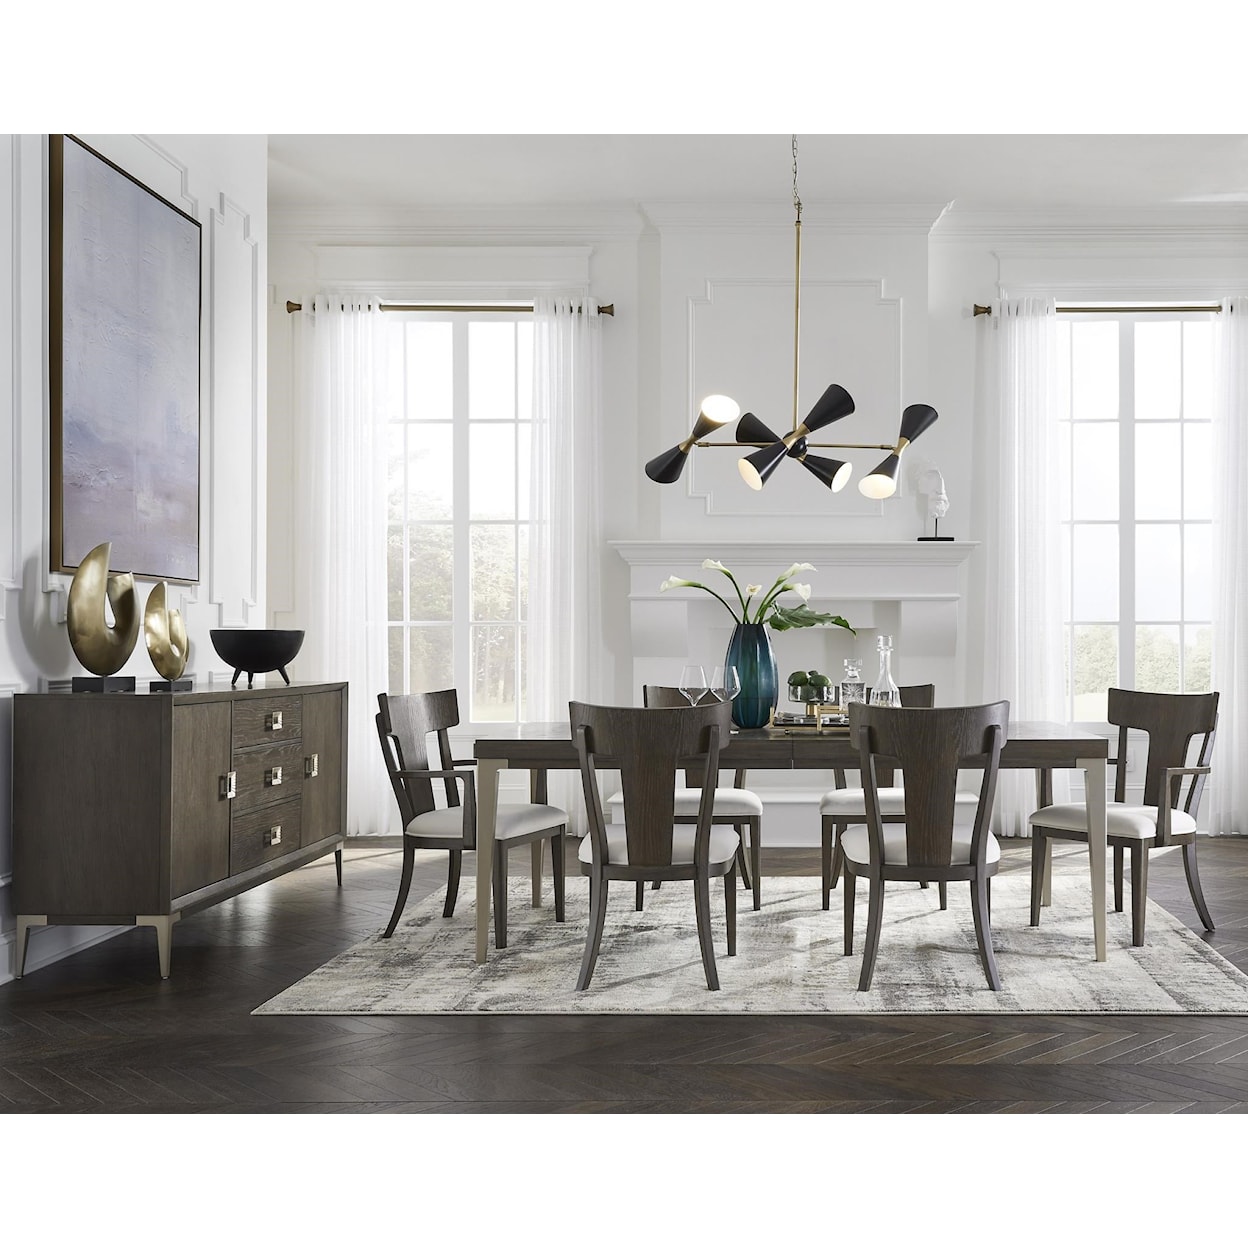 Pulaski Furniture Boulevard by Drew and Jonathan Home  Boulevard 5-Pc Dining Set with Leaf